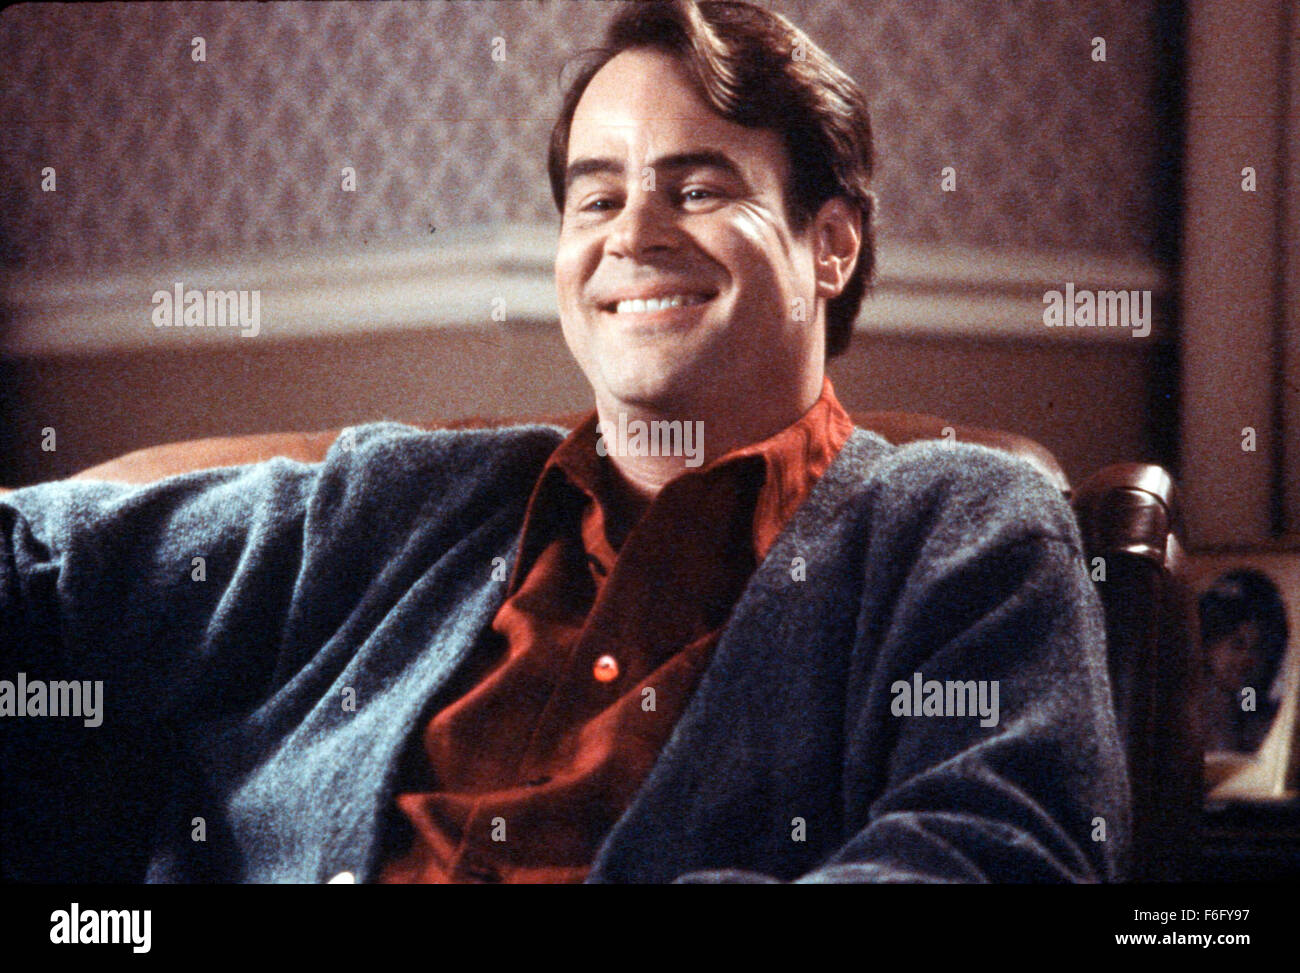 Mar 08, 1994; Los Angeles, CA, USA; Canadian actor DAN AYKROYD in a scene from 1994 movie 'My Girl 2' directed by Howard Zieff. Stock Photo